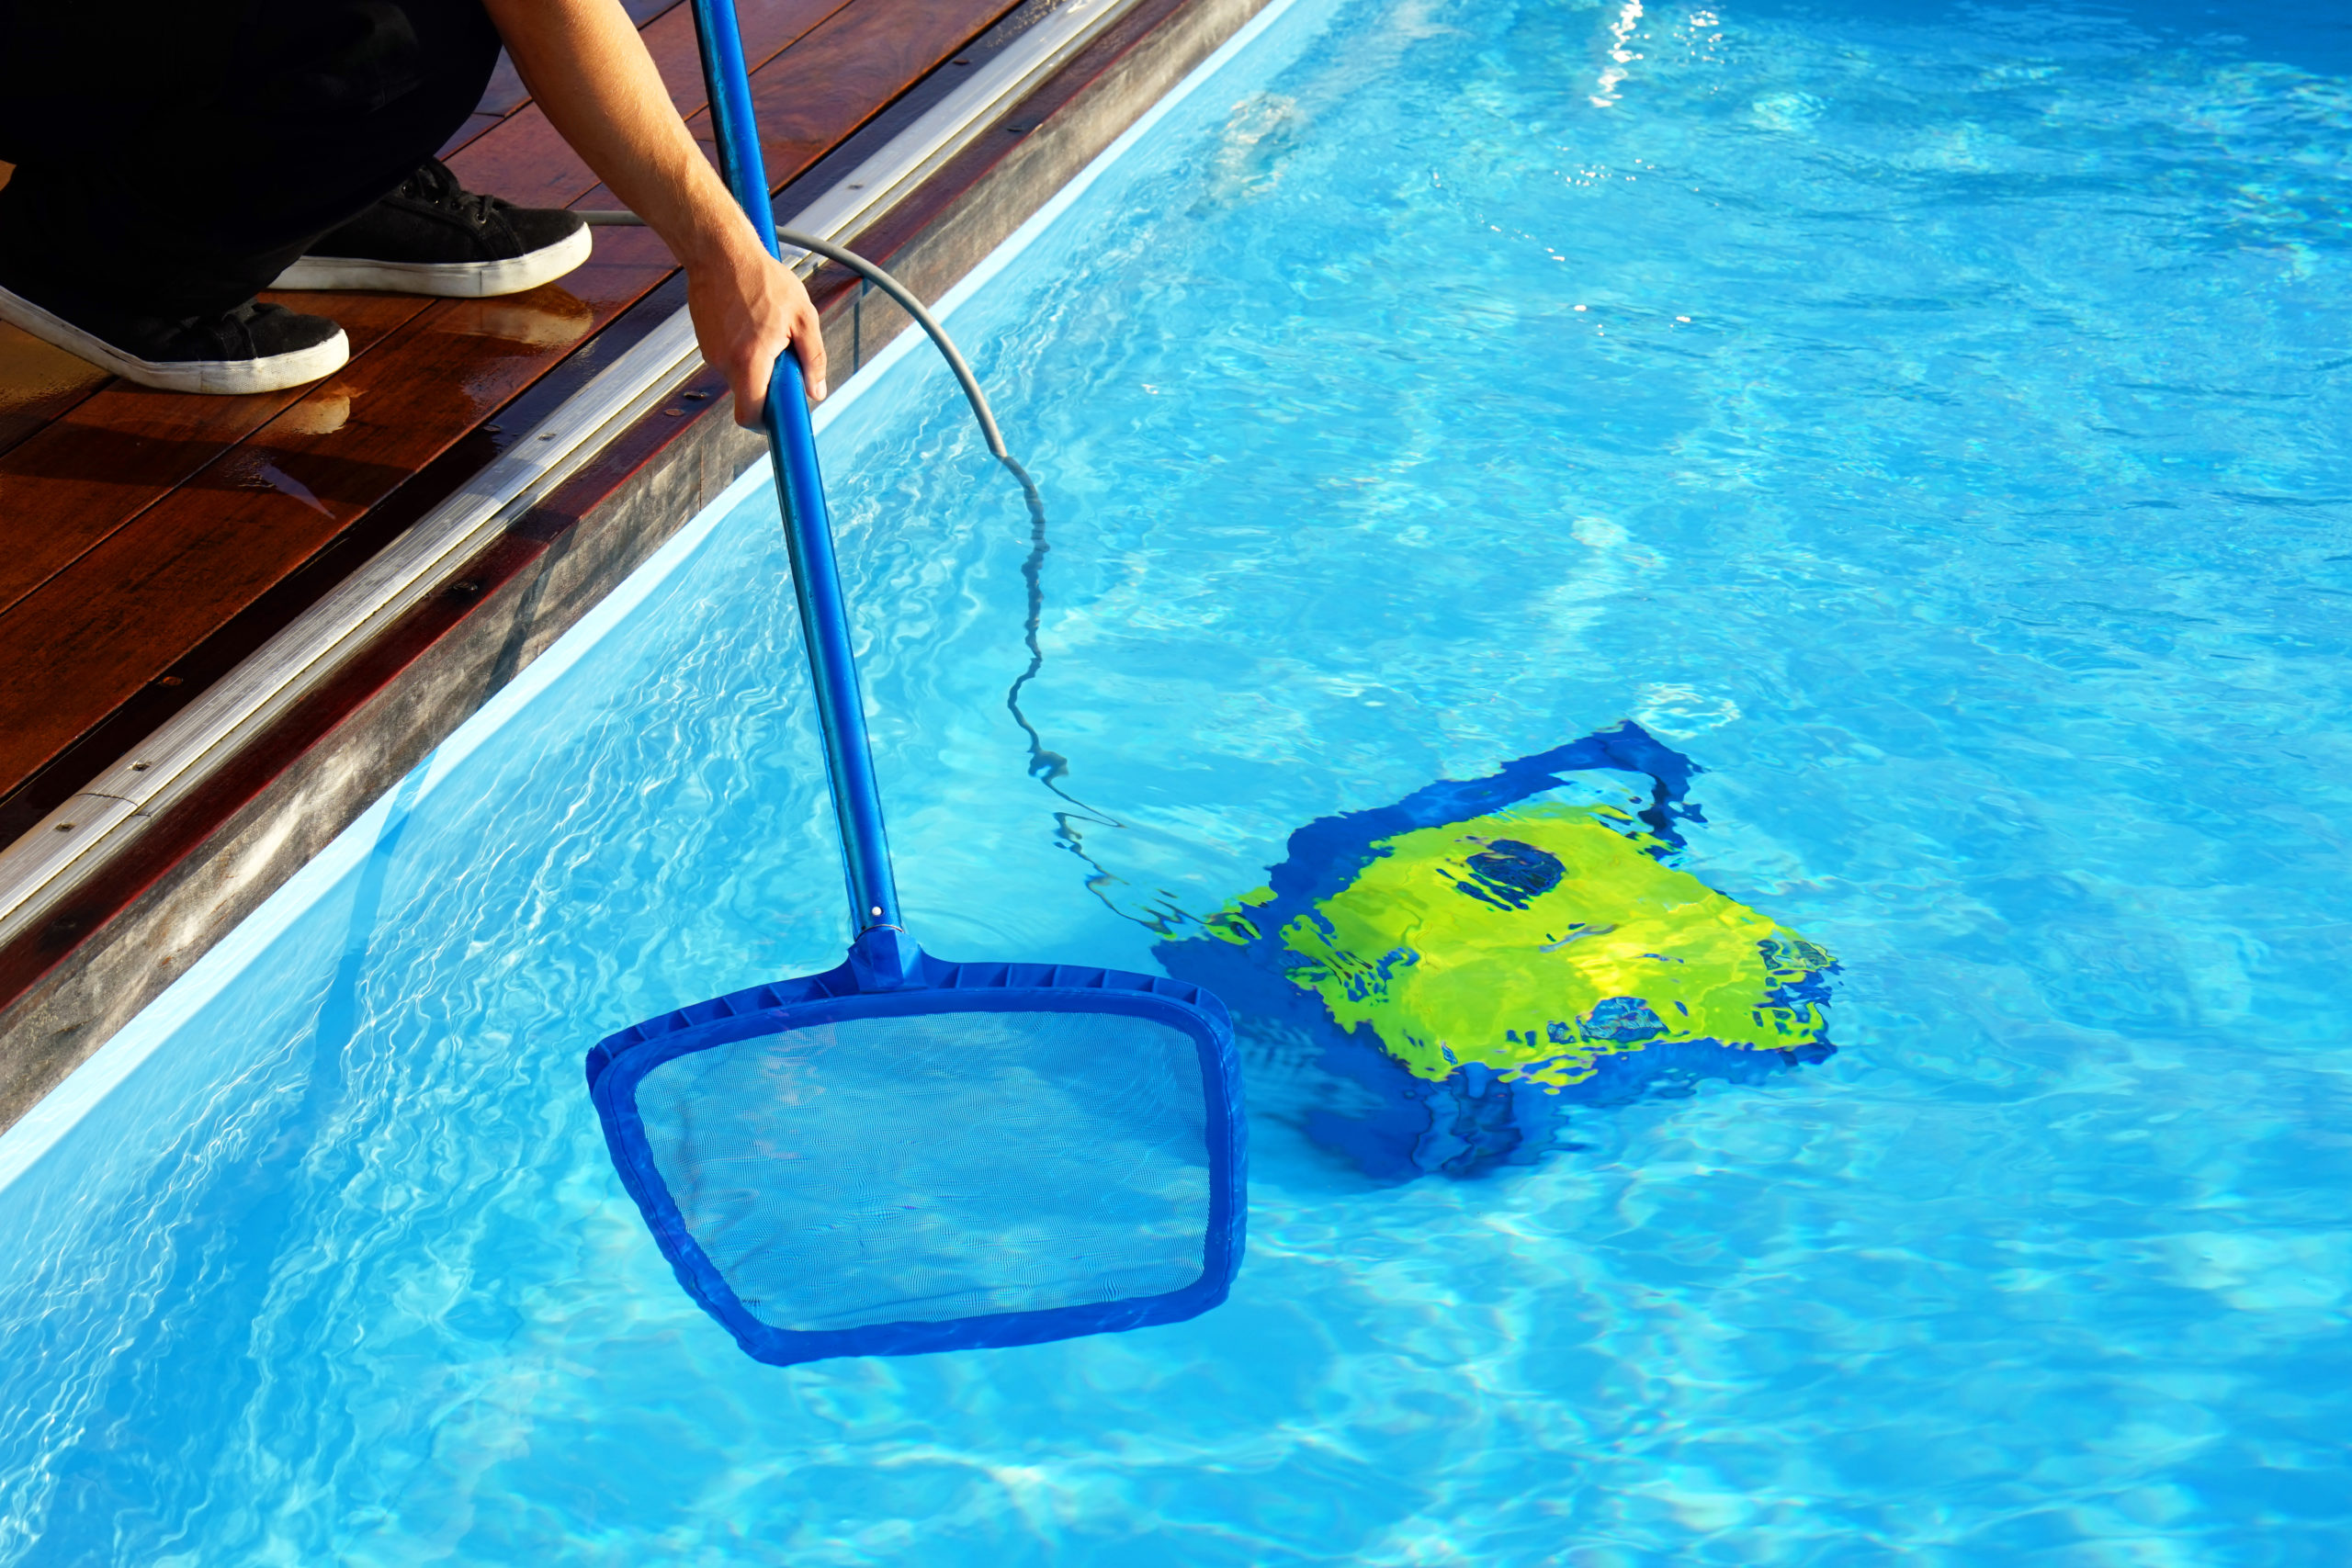 A pool vacuum device used for cleaning and maintaining the cleanliness of a swimming pool.